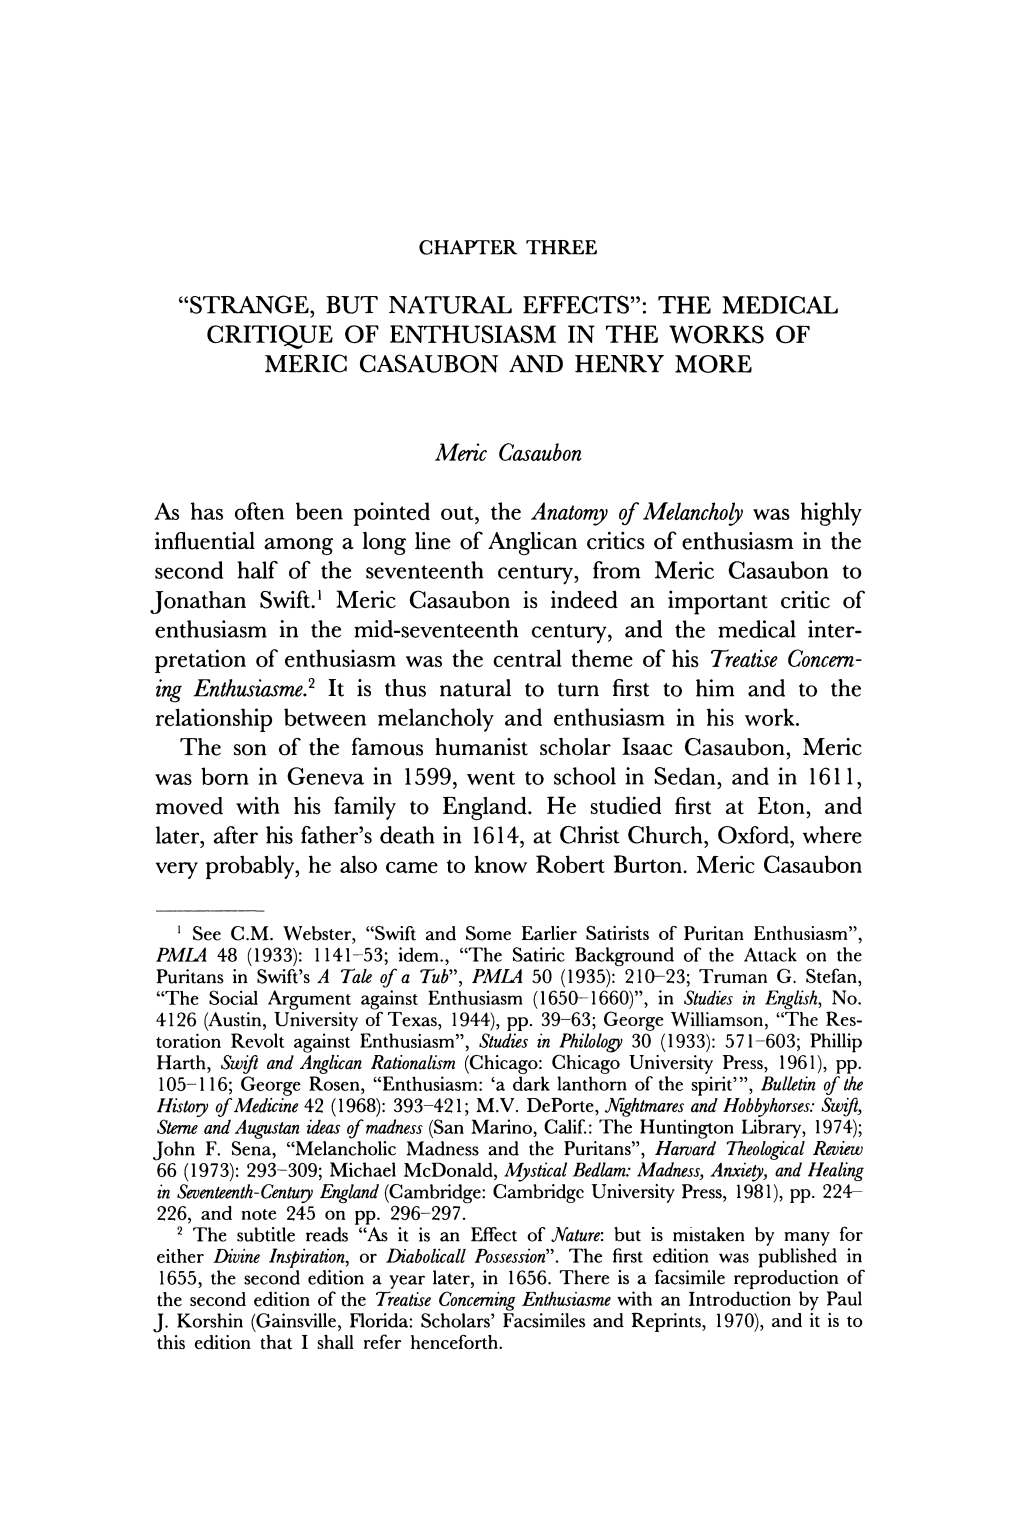 Strange, but Natural Effects": the Medical Critique of Enthusiasm in the Works of Meric Casaubon and Henry More